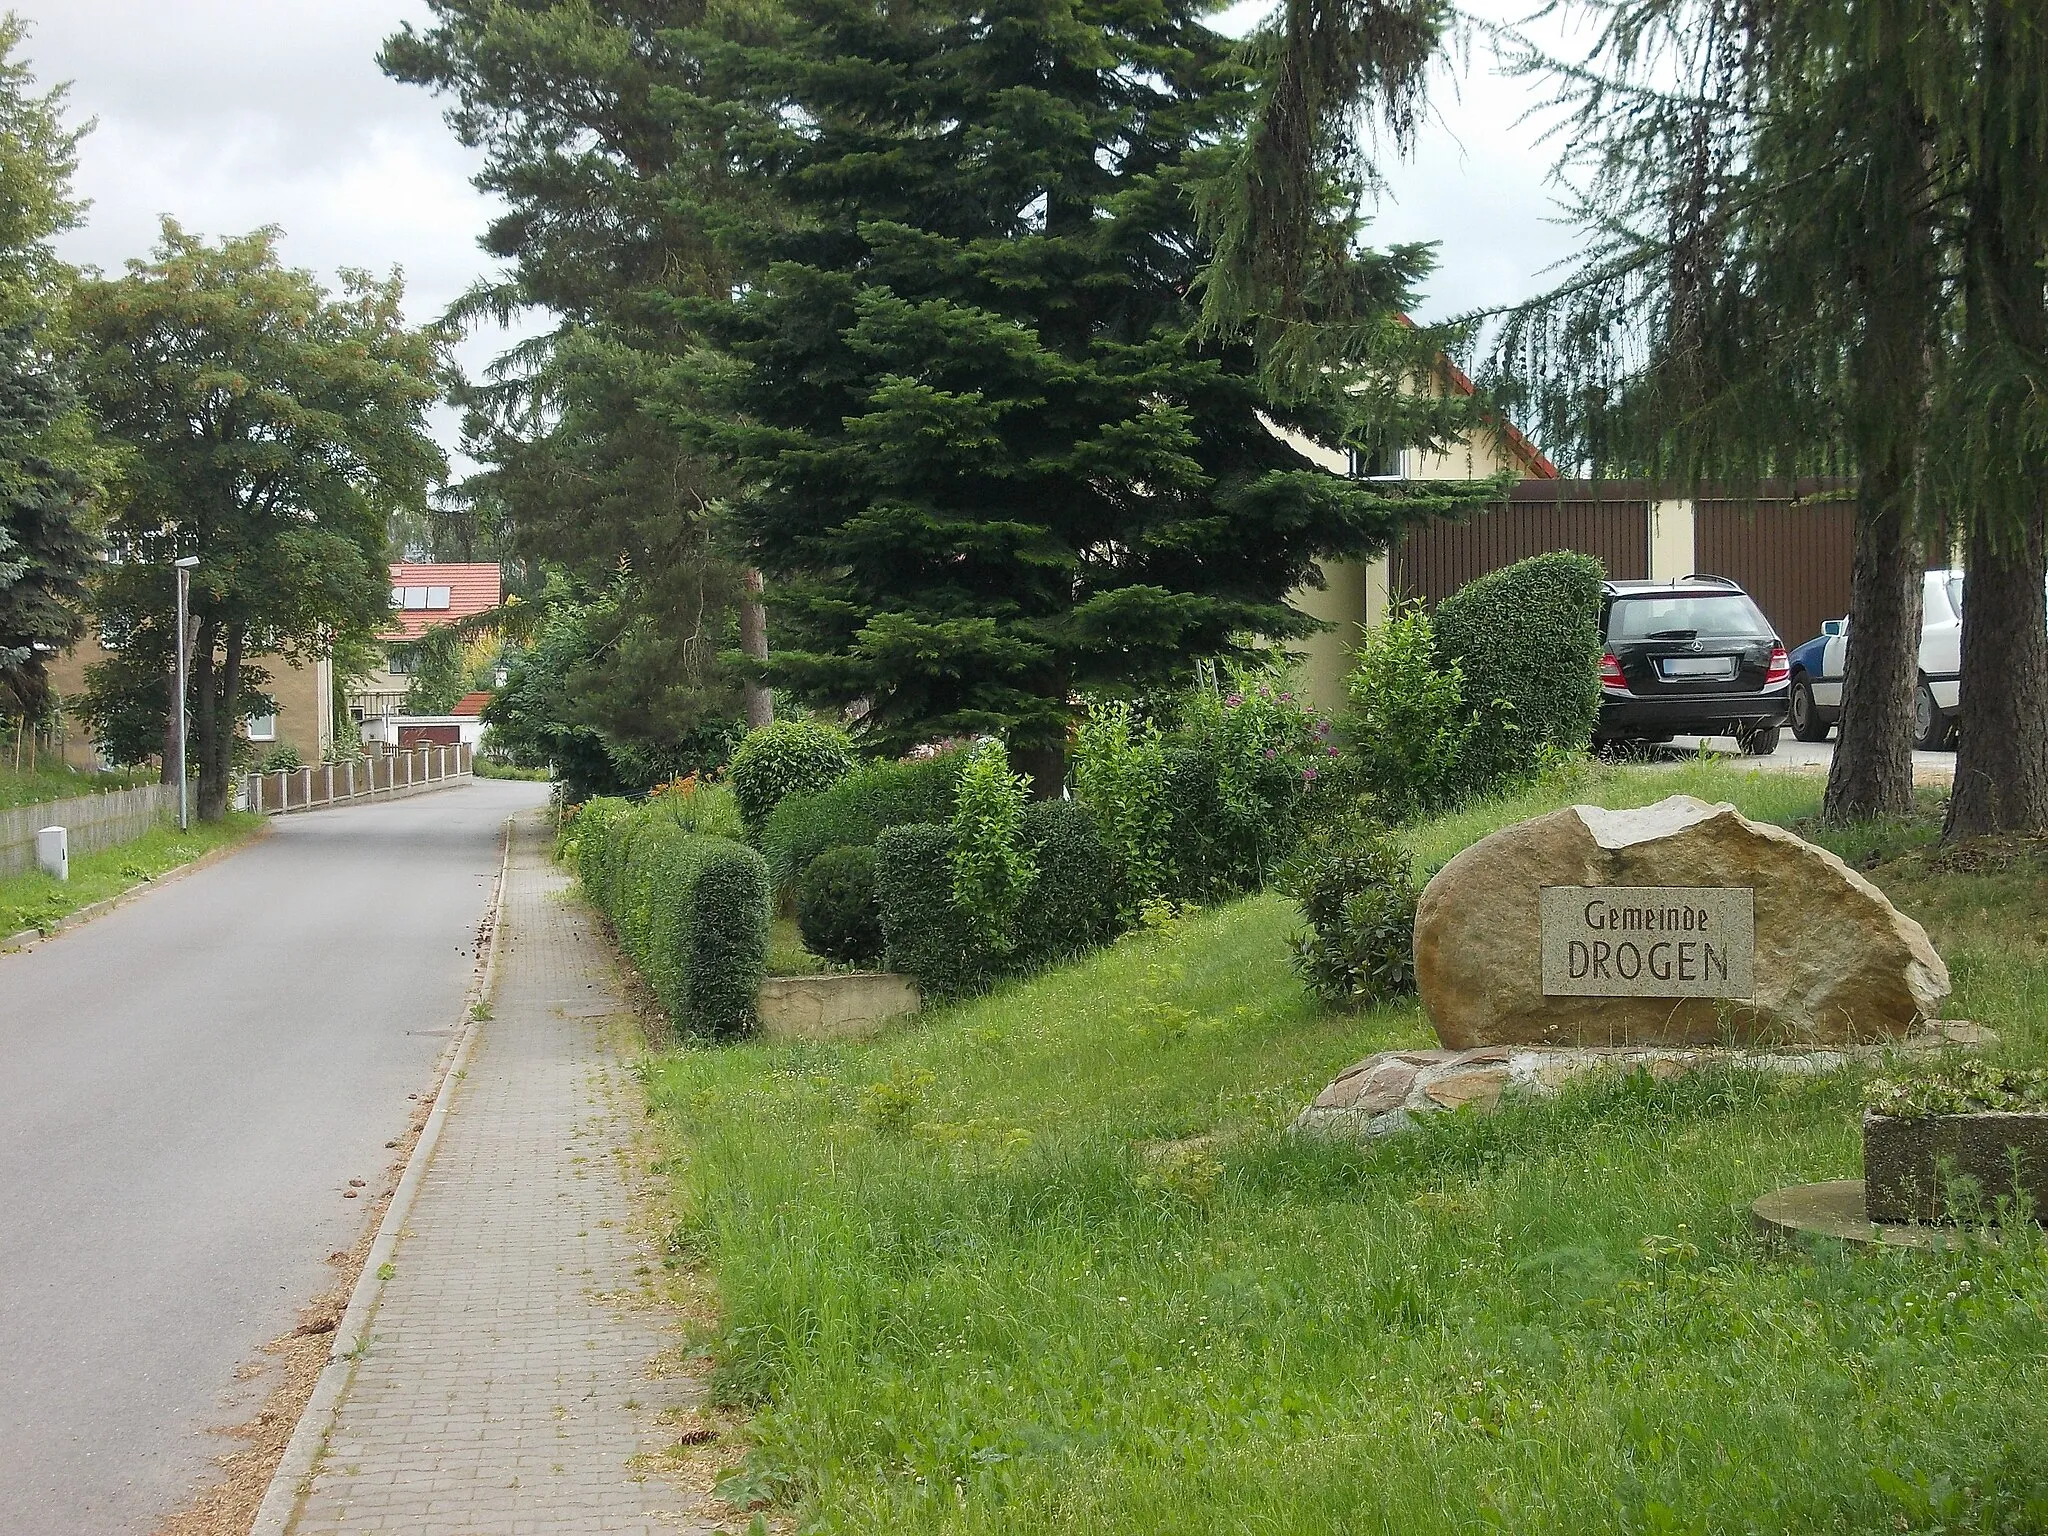 Photo showing: Southern entrance to the village of Drogen (Altenburger Land district, Thuringia)